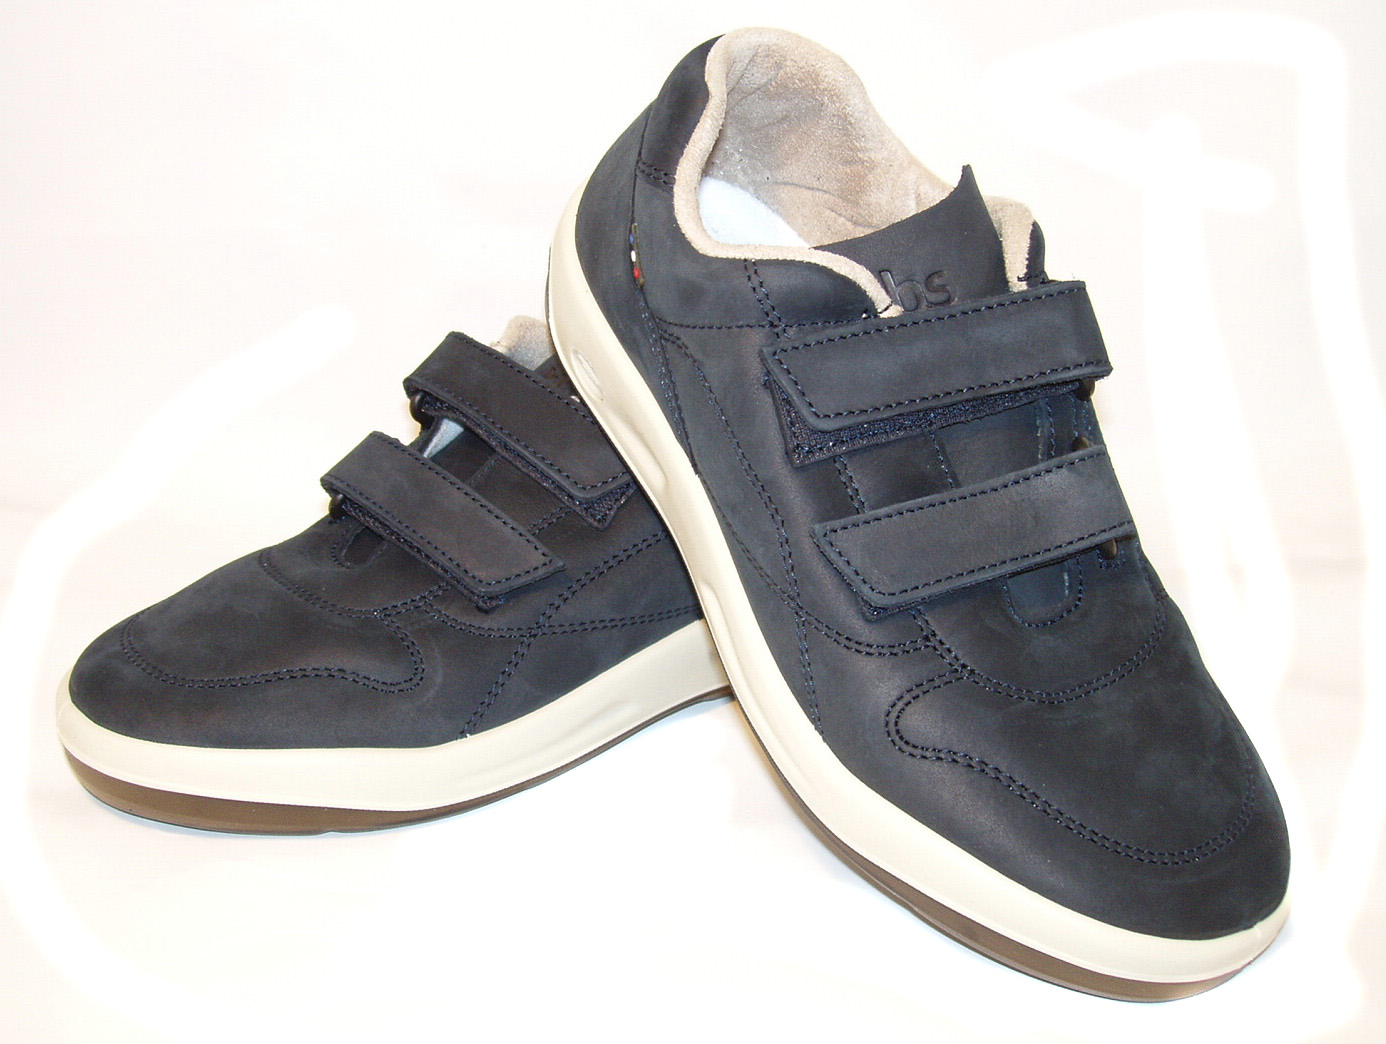 Chaussures Homme - tbs